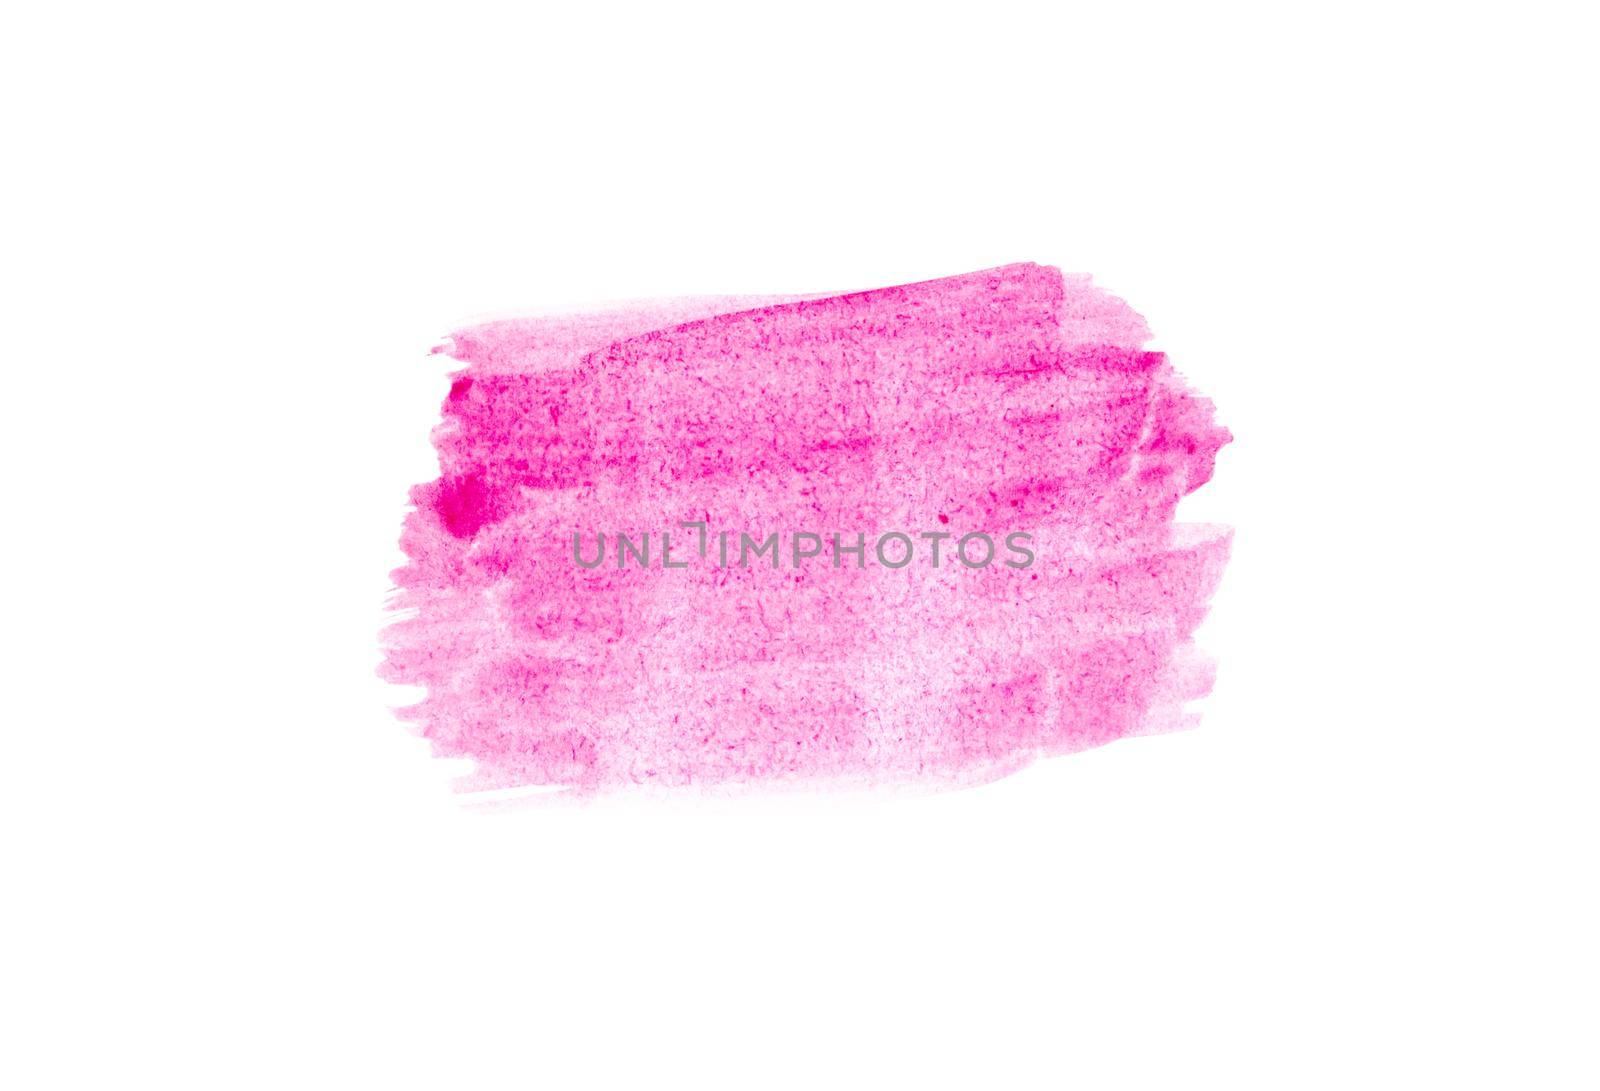 Light pink smear of acrylic paint isolated on white background. Abstract colorful pink paint brush and strokes.